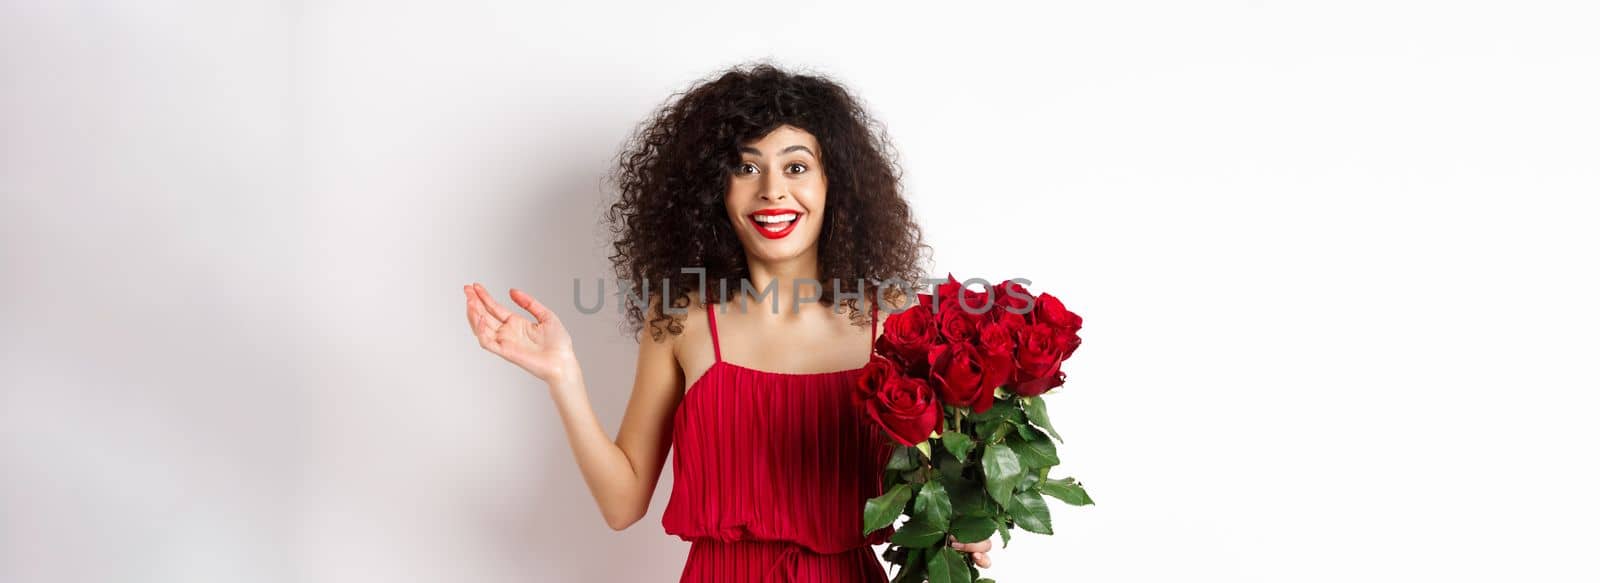 Romance and Valentines day. Woman gasping surprised and happy, receive surprise gift from lover, holding bouquet of red roses, standing on white background.